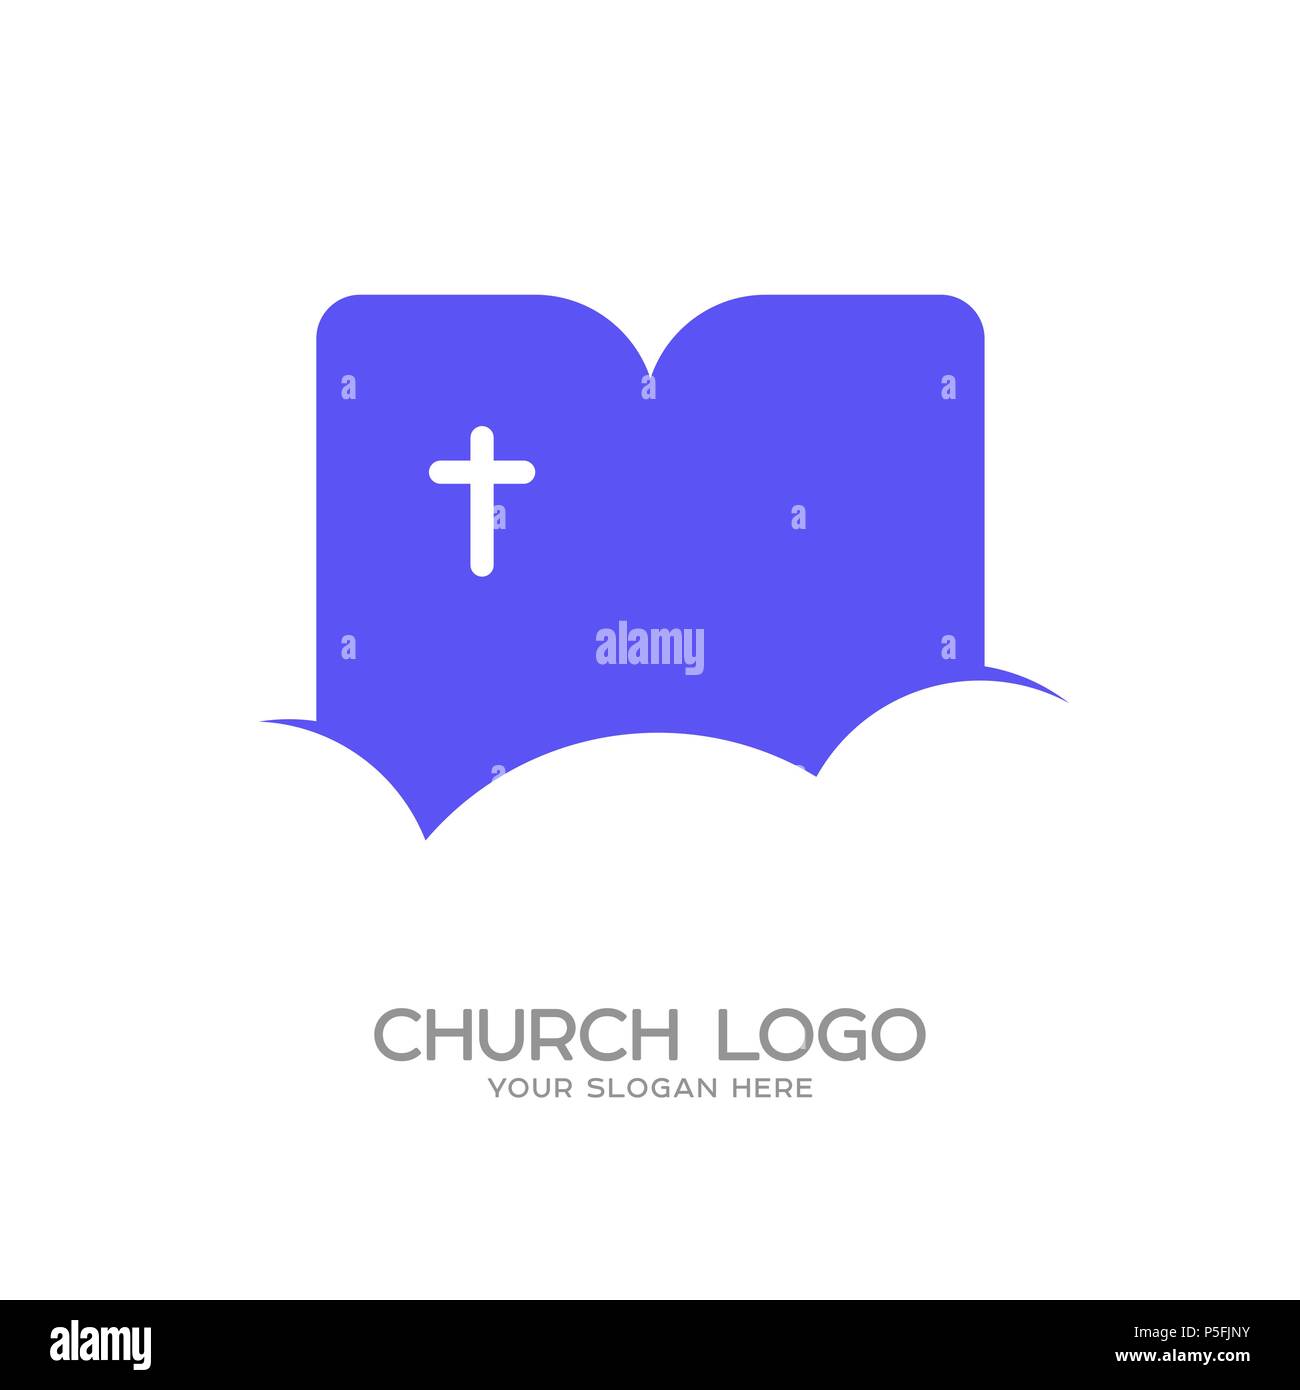 Church logo. Christian symbols. Cross of Jesus Christ against the background of a cloud Stock Vector